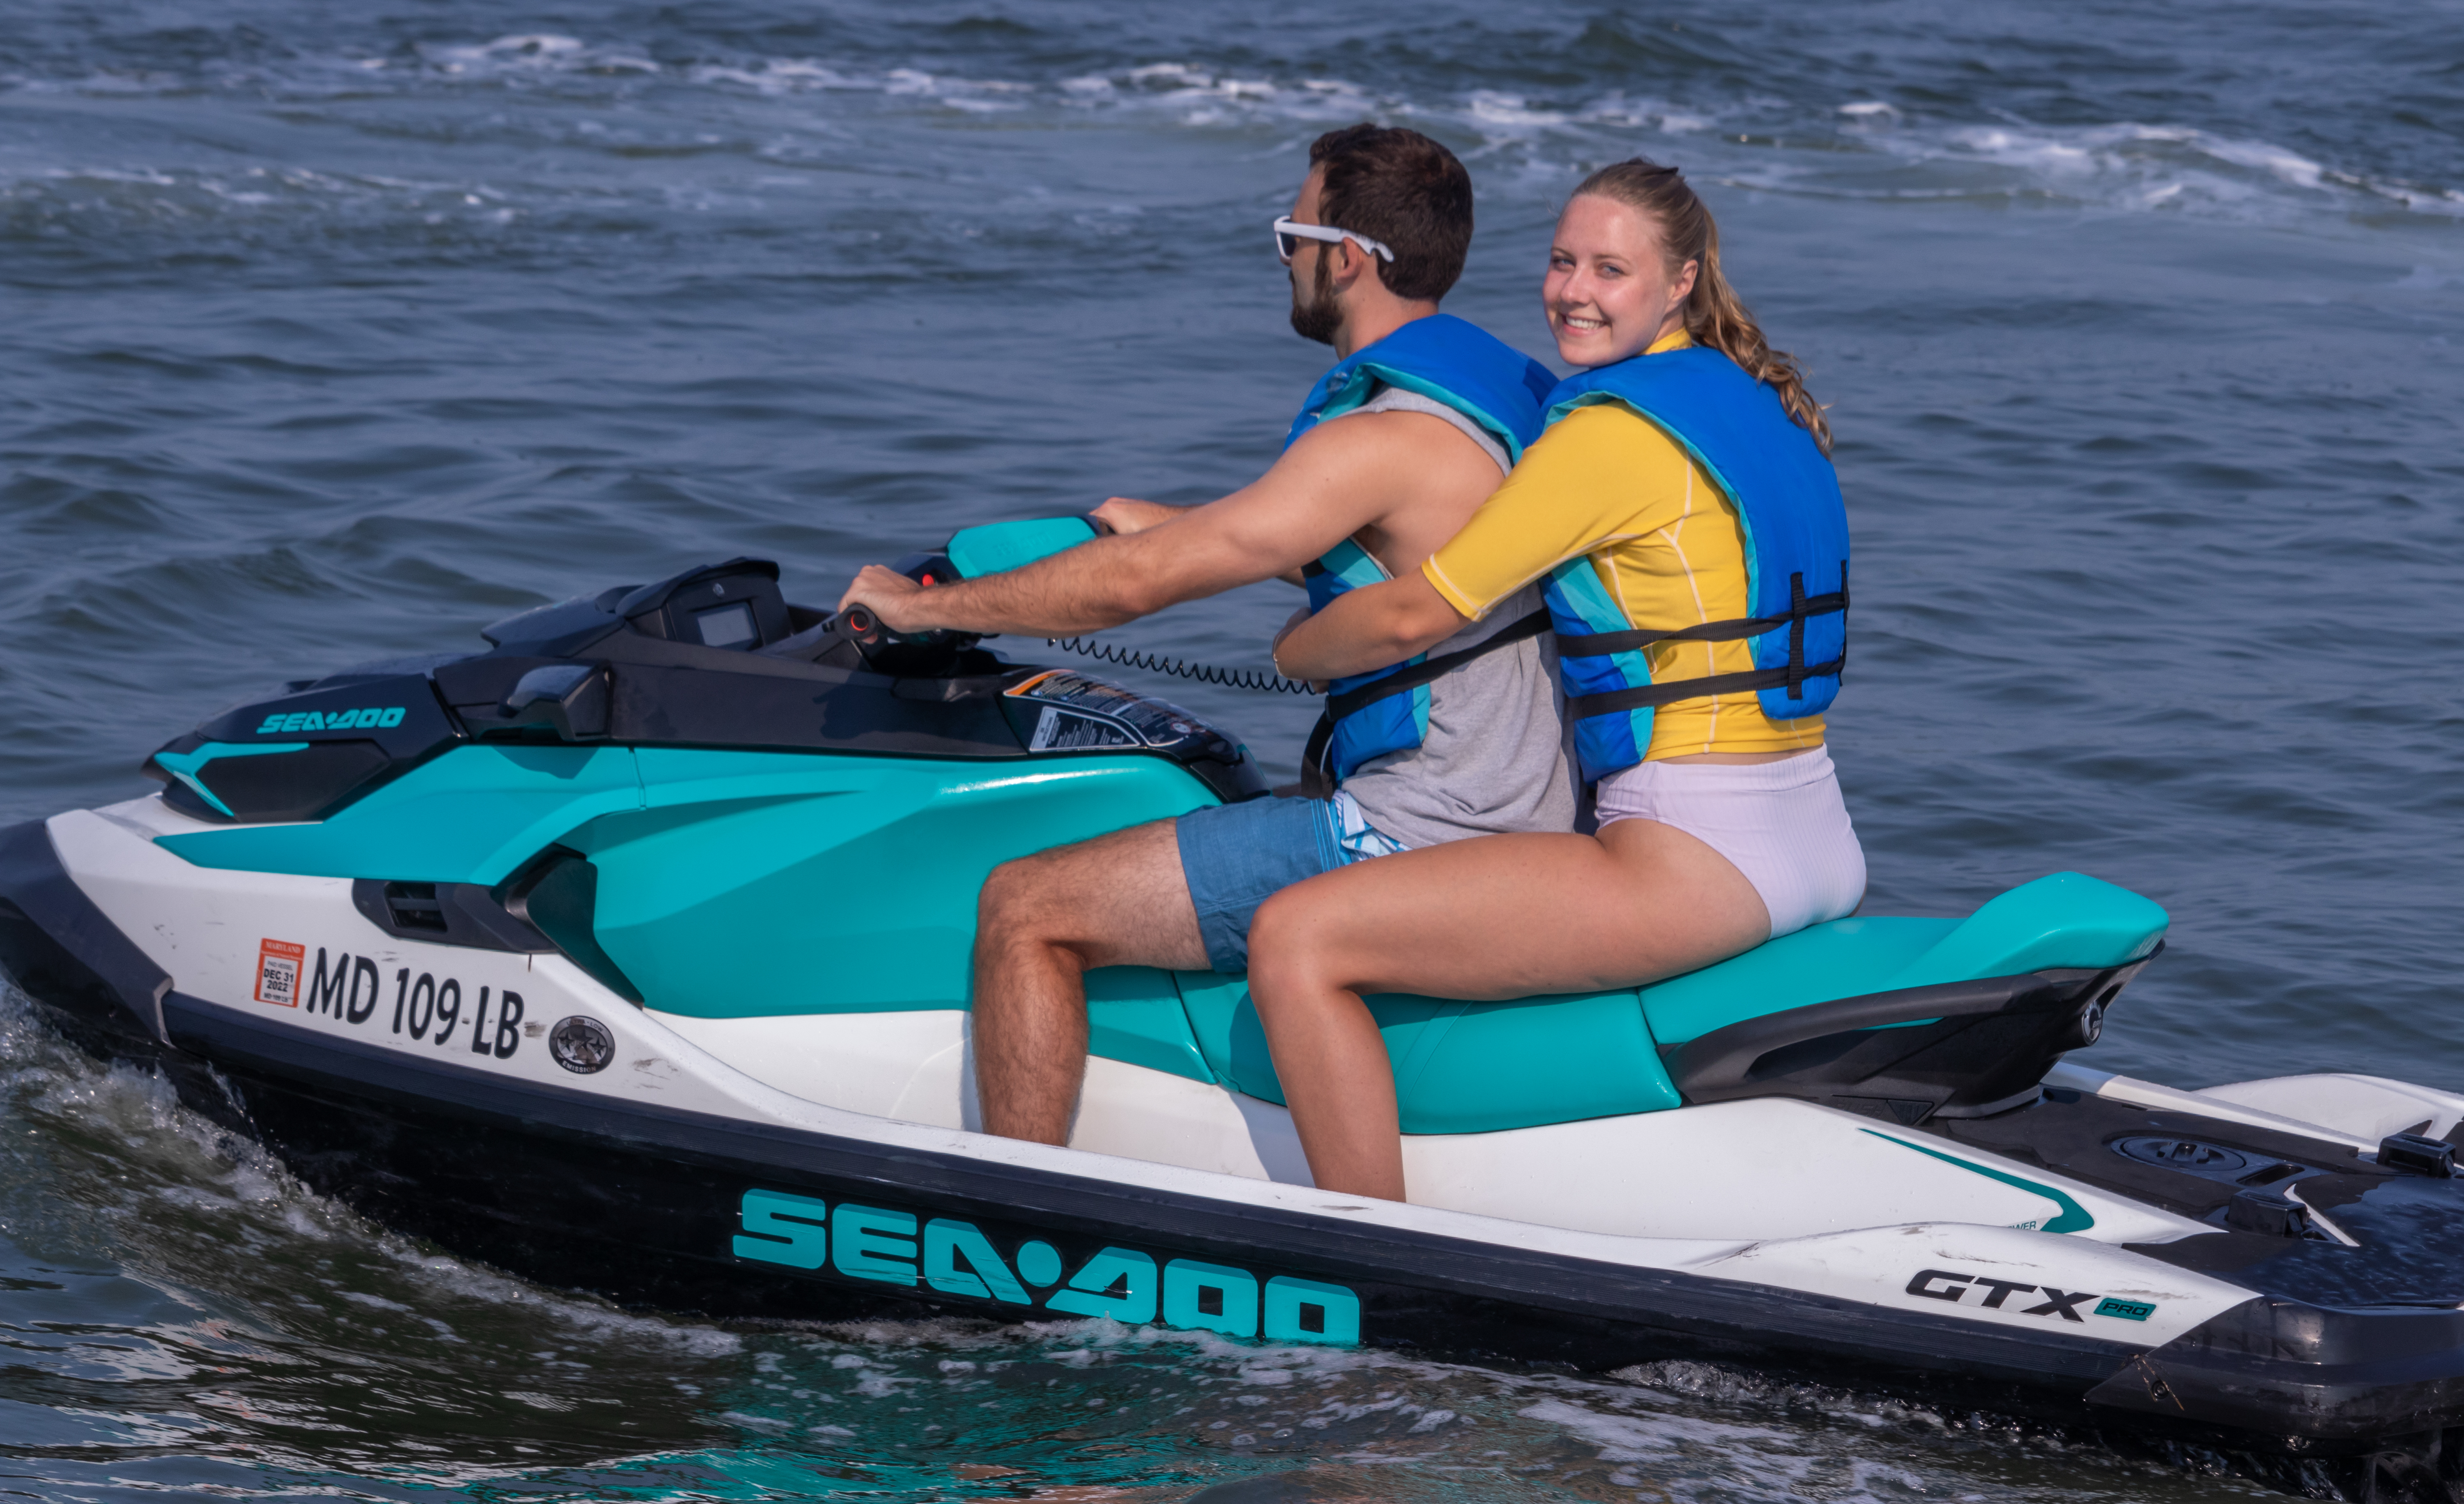 two people wearing blue lifejackets riding one teal jet ski